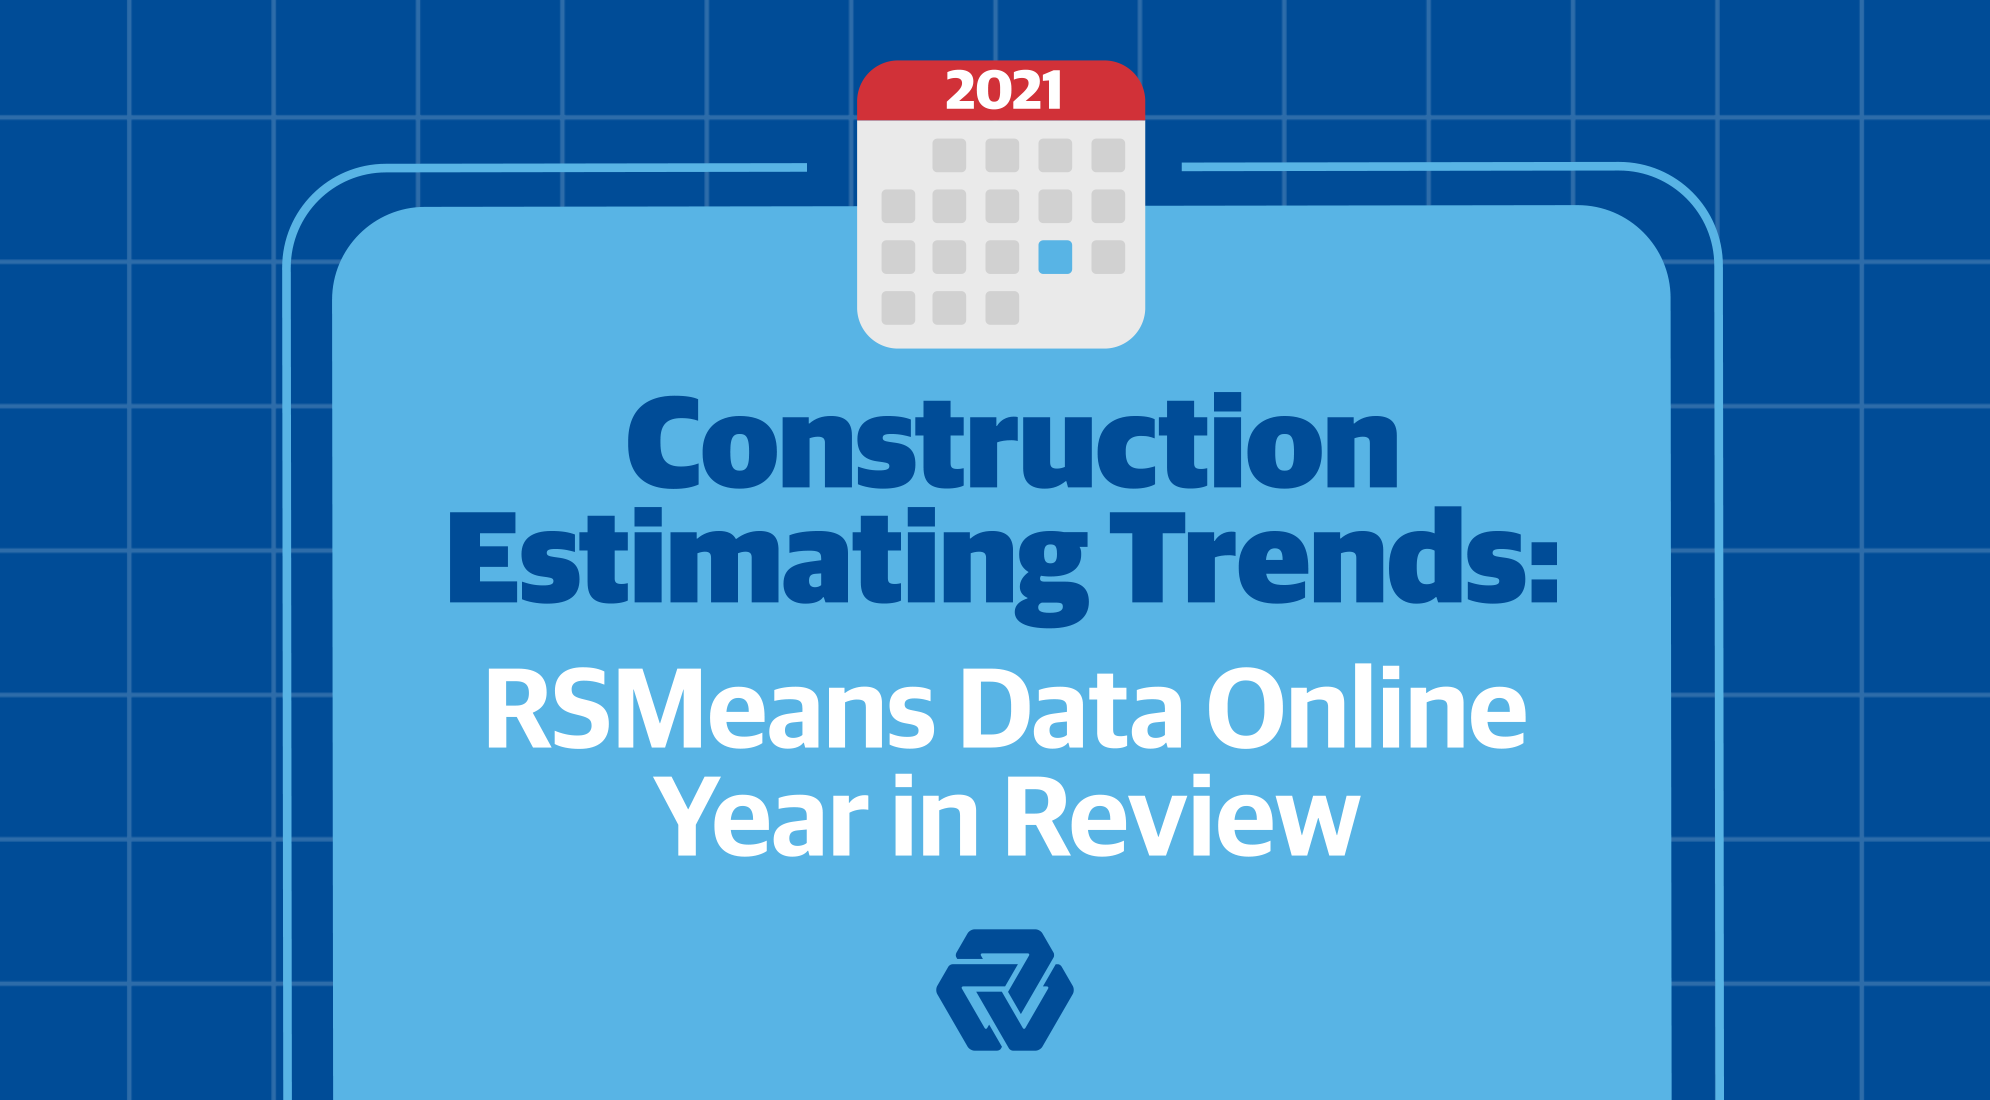 RSMeans Data Online Year in Review: Construction Estimating Trends